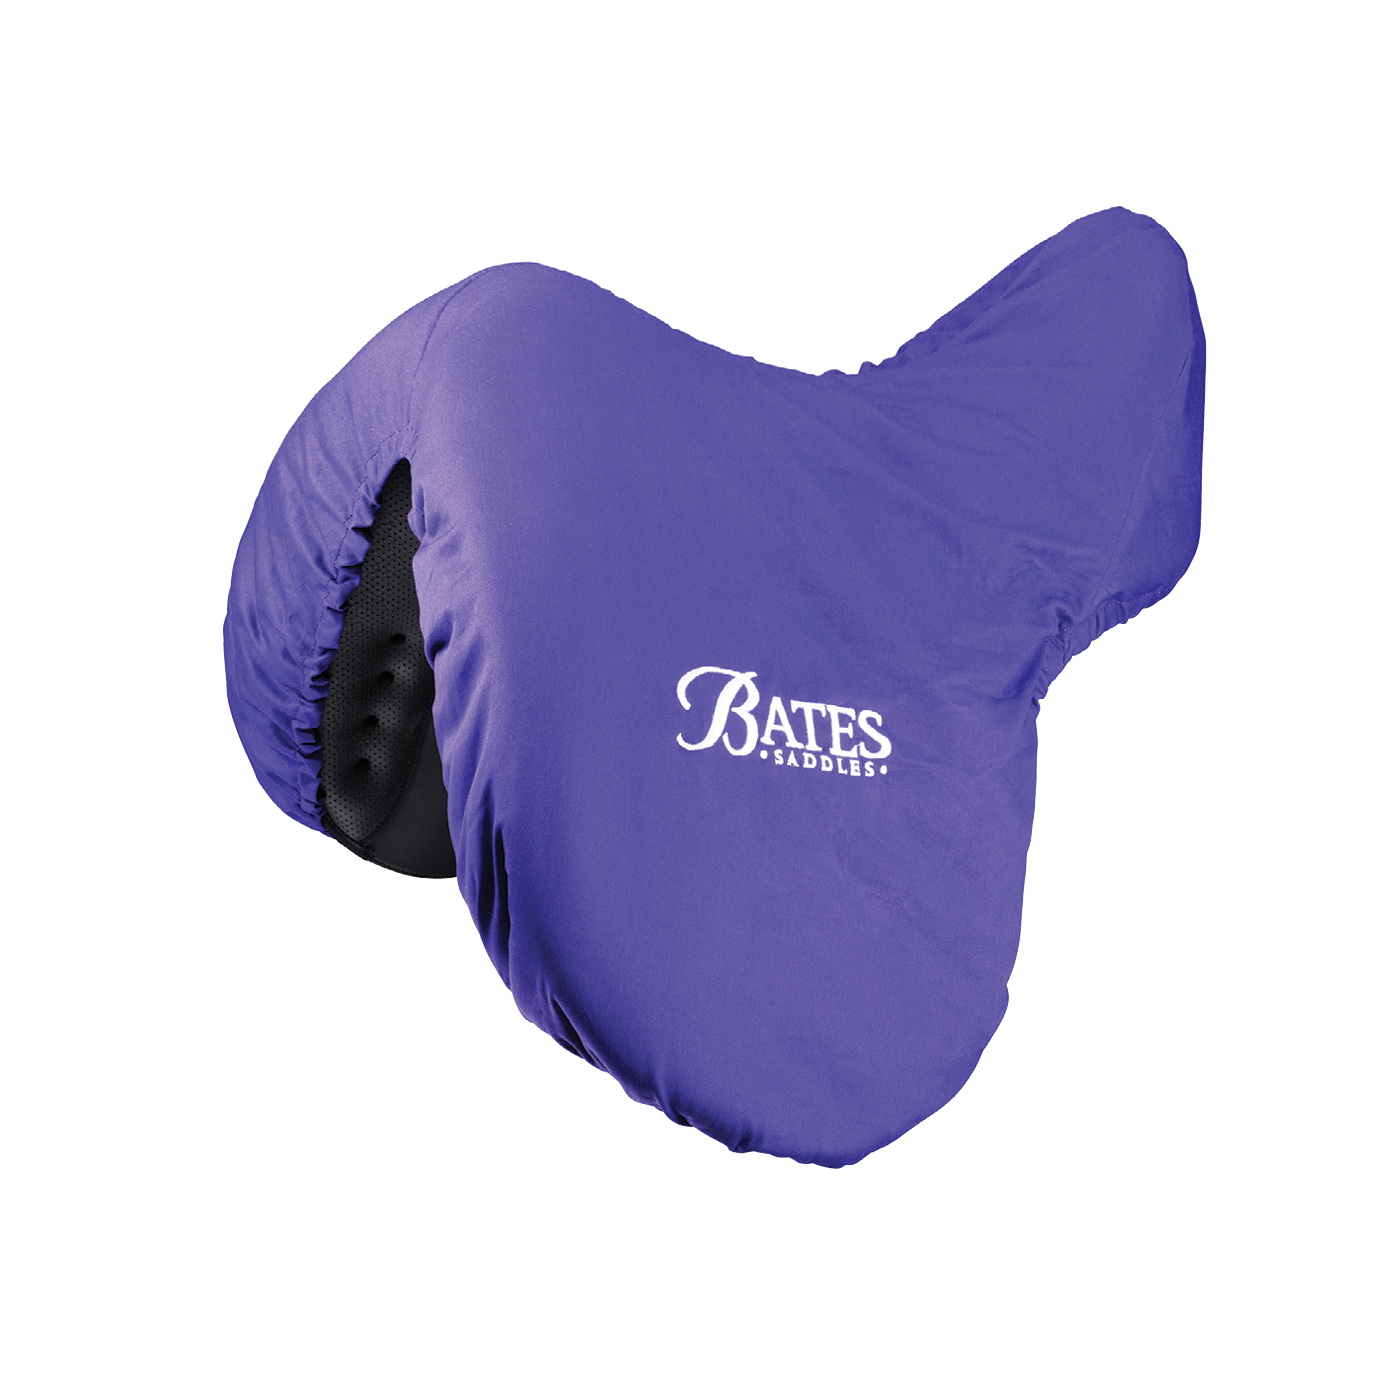 Bates Deluxe Saddle Cover - 619:32476867264608